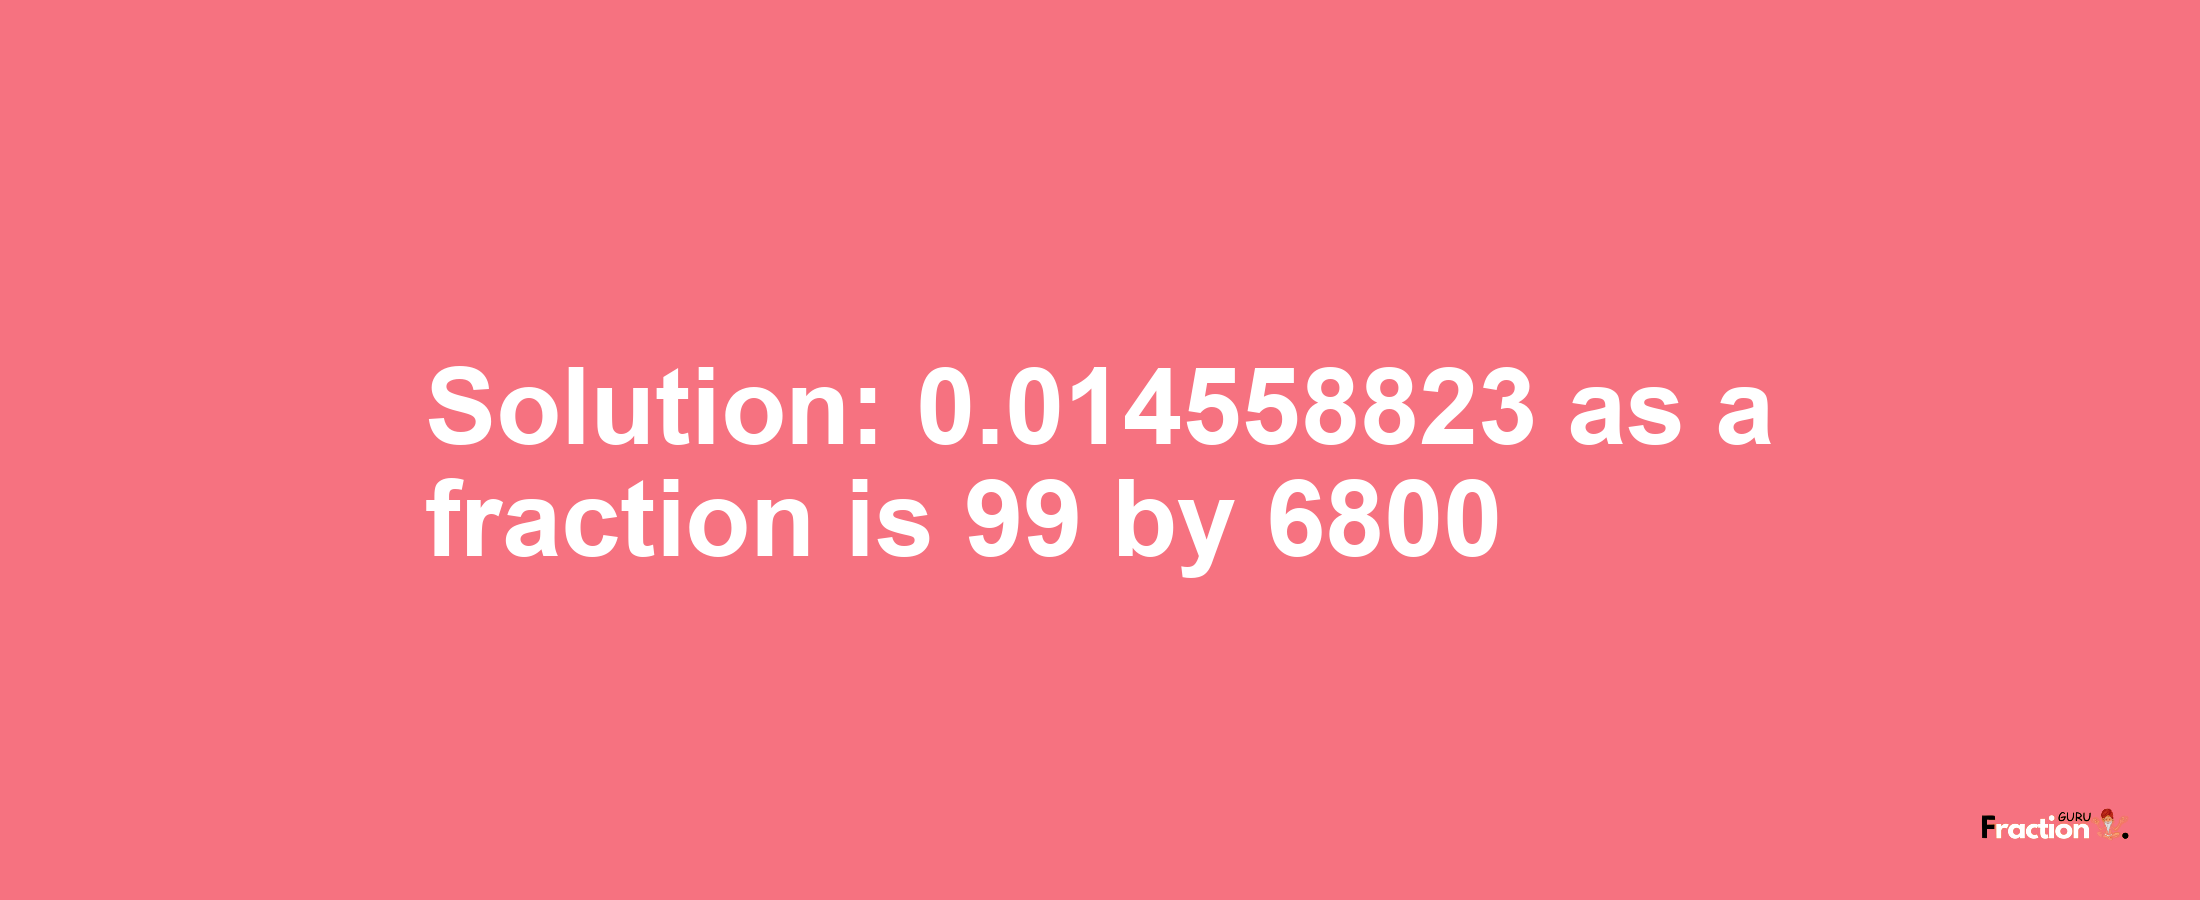 Solution:0.014558823 as a fraction is 99/6800